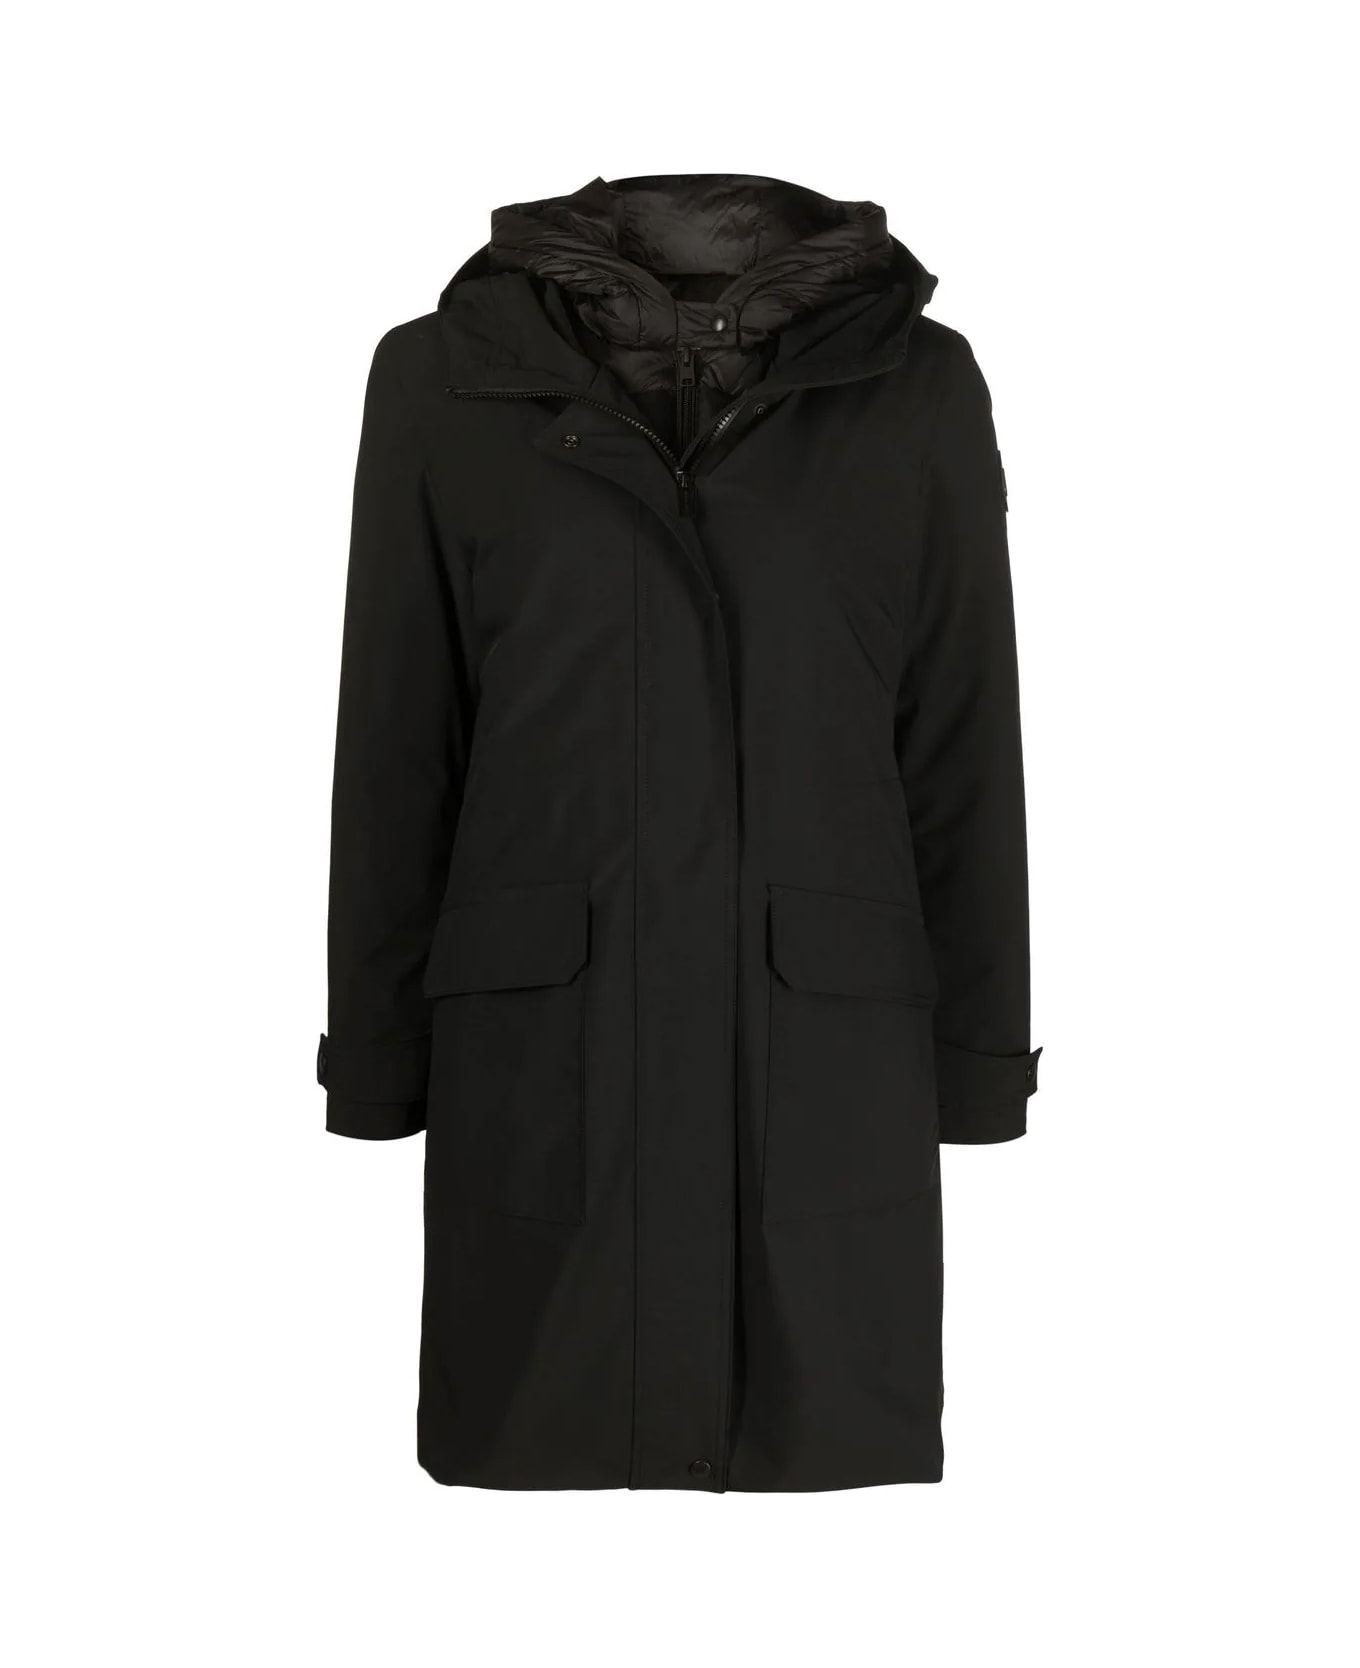 Woolrich Long Military 3in1 Parka - Black